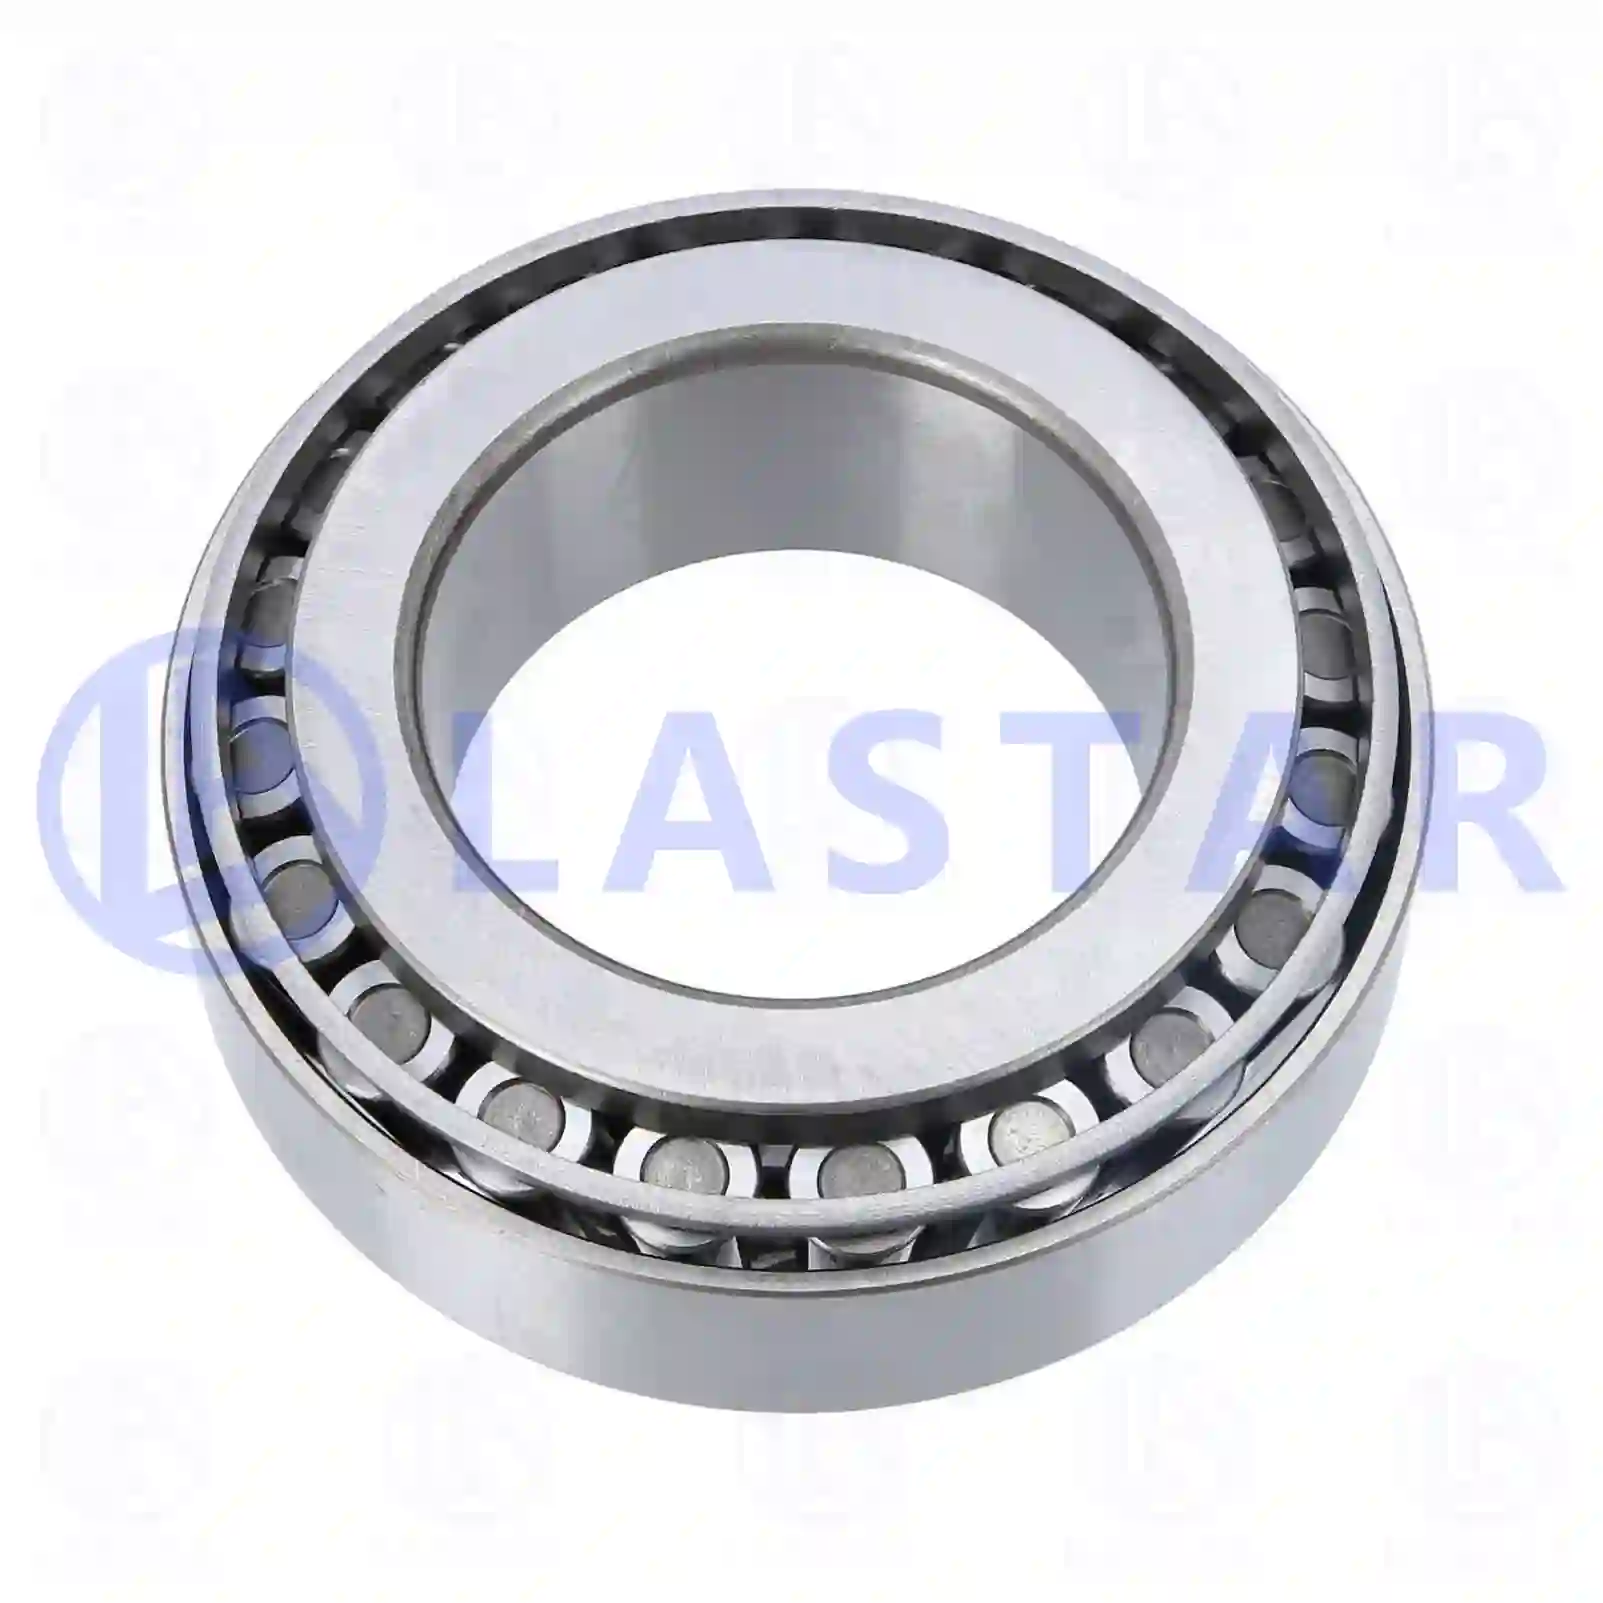 Bearings Tapered roller bearing, la no: 77725567 ,  oem no:0264077500, 0264082900, 0264102900, 0902640775, 10500858, 710500858, 00626153, 07175254, 06324890042, 81440500070, 81934200080, 0019802702, 0029818605, 0029818905, 0089810005, 3849817205, 4200007000, 260998, 6691299000, 6502196Z Lastar Spare Part | Truck Spare Parts, Auotomotive Spare Parts